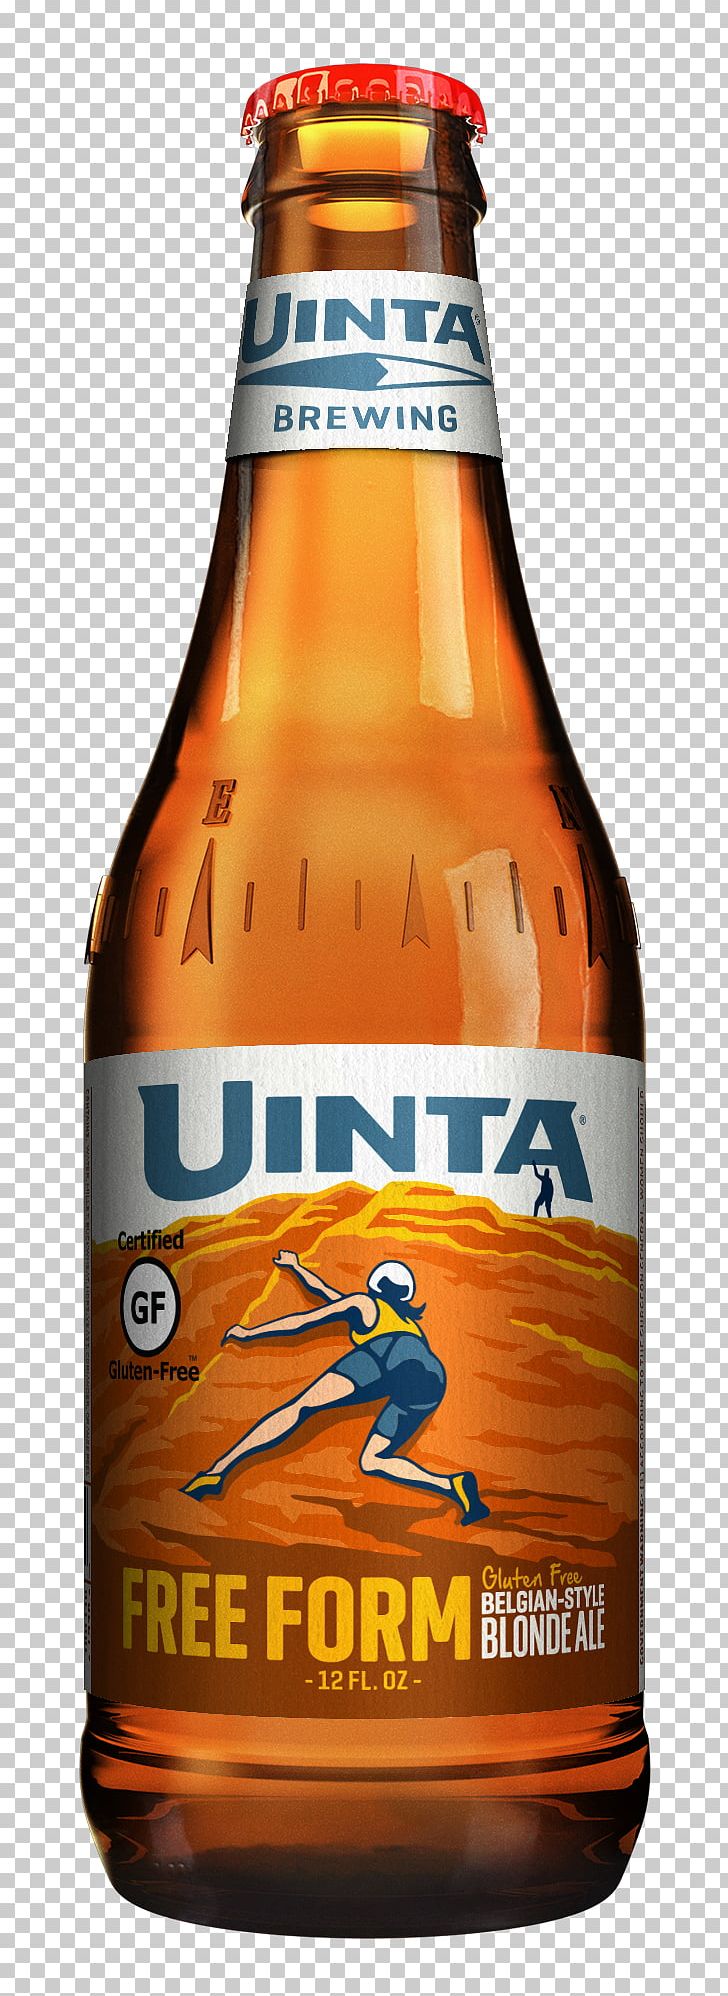 Lager Uinta Brewing Co Beer India Pale Ale Saison PNG, Clipart, Ale, Beer, Beer Bottle, Beer Brewing Grains Malts, Bottle Free PNG Download